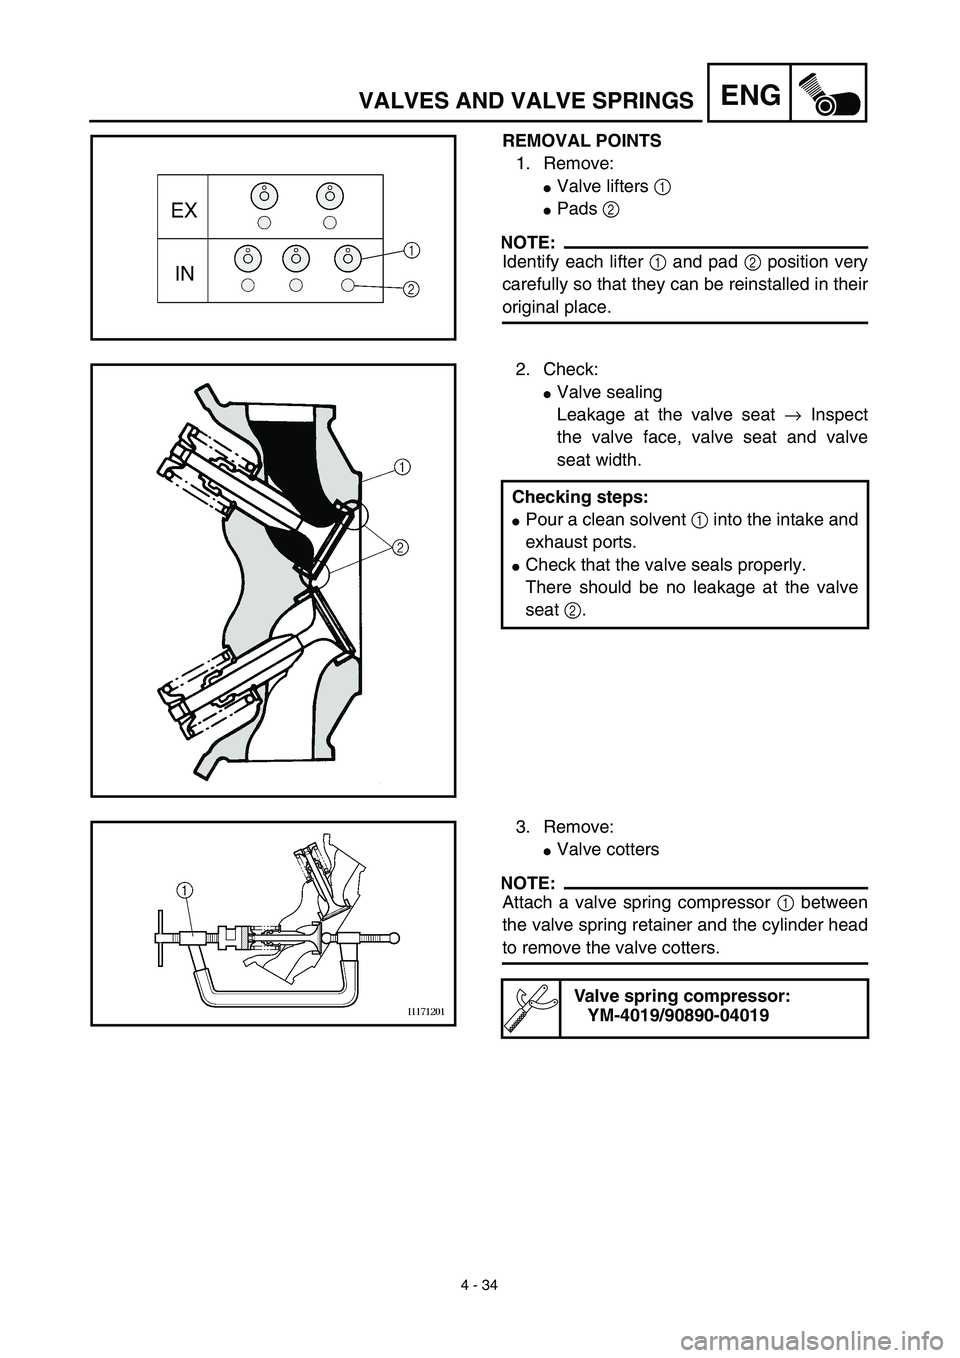 YAMAHA YZ450F 2003  Owners Manual 4 - 34
ENGVALVES AND VALVE SPRINGS
REMOVAL POINTS
1. Remove: 
Valve lifters 1 
Pads 2 
NOTE:
Identify each lifter 1 and pad 2 position very
carefully so that they can be reinstalled in their
origina